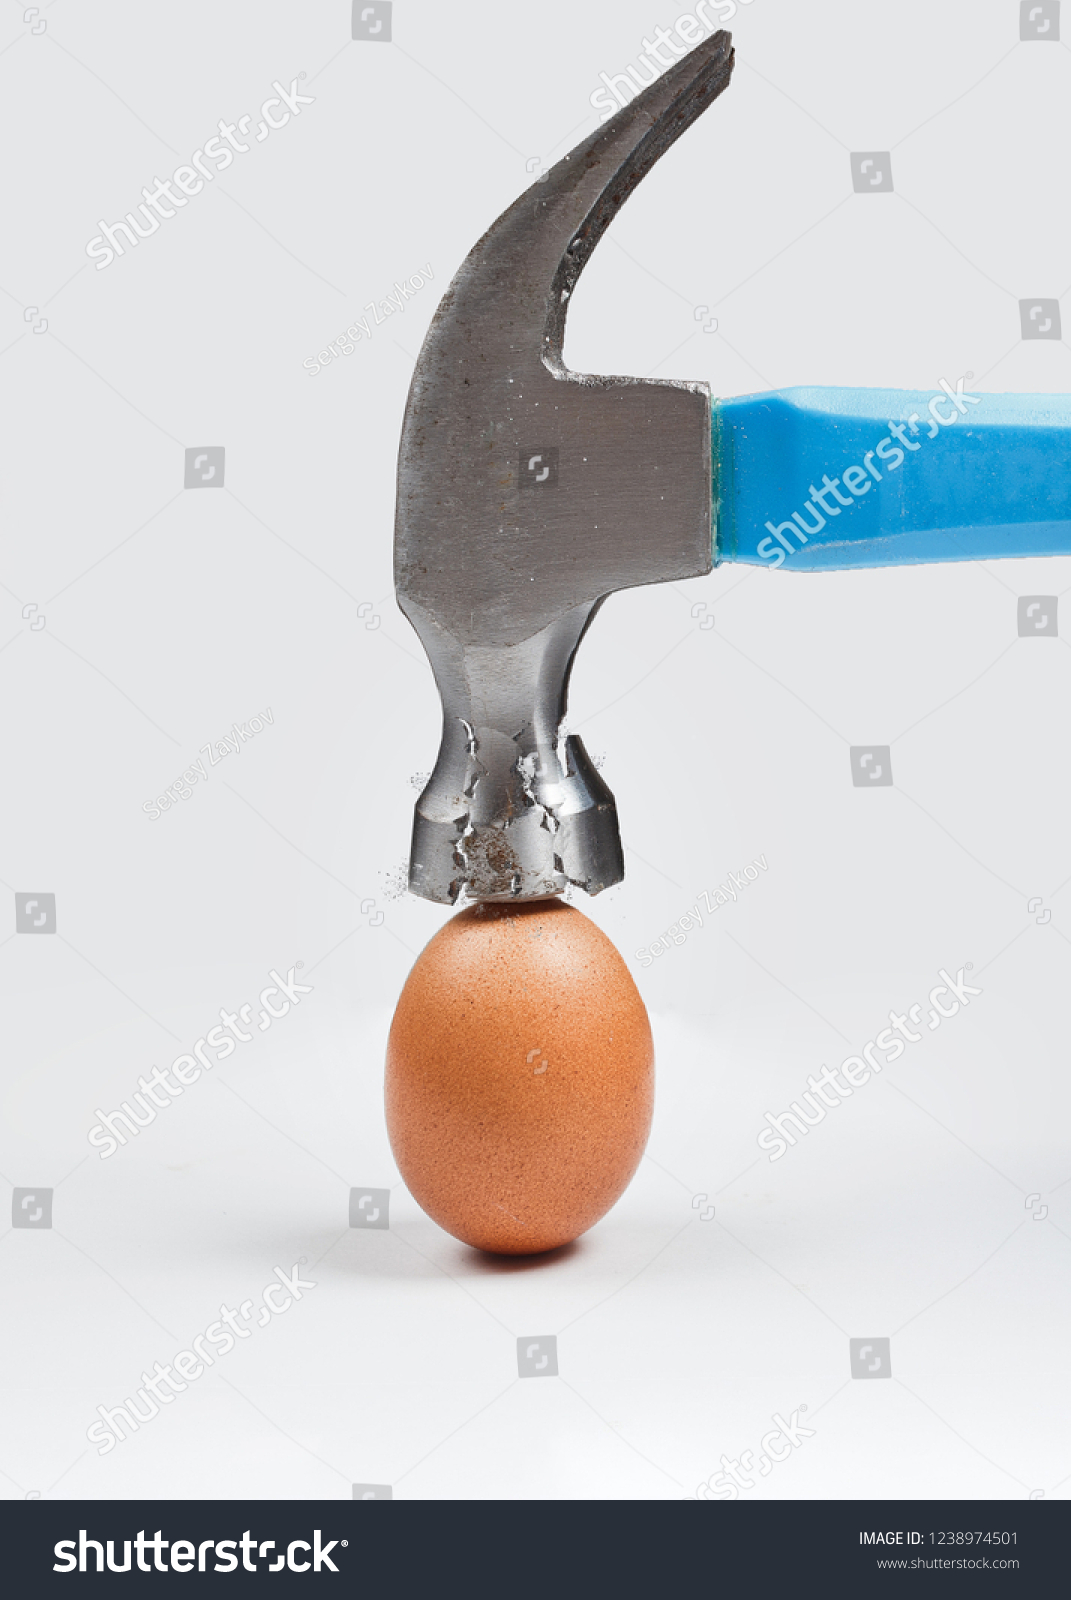 Hammer is breaking chicken egg. Concept of strength, durability, stress resistance and fortitude. #1238974501